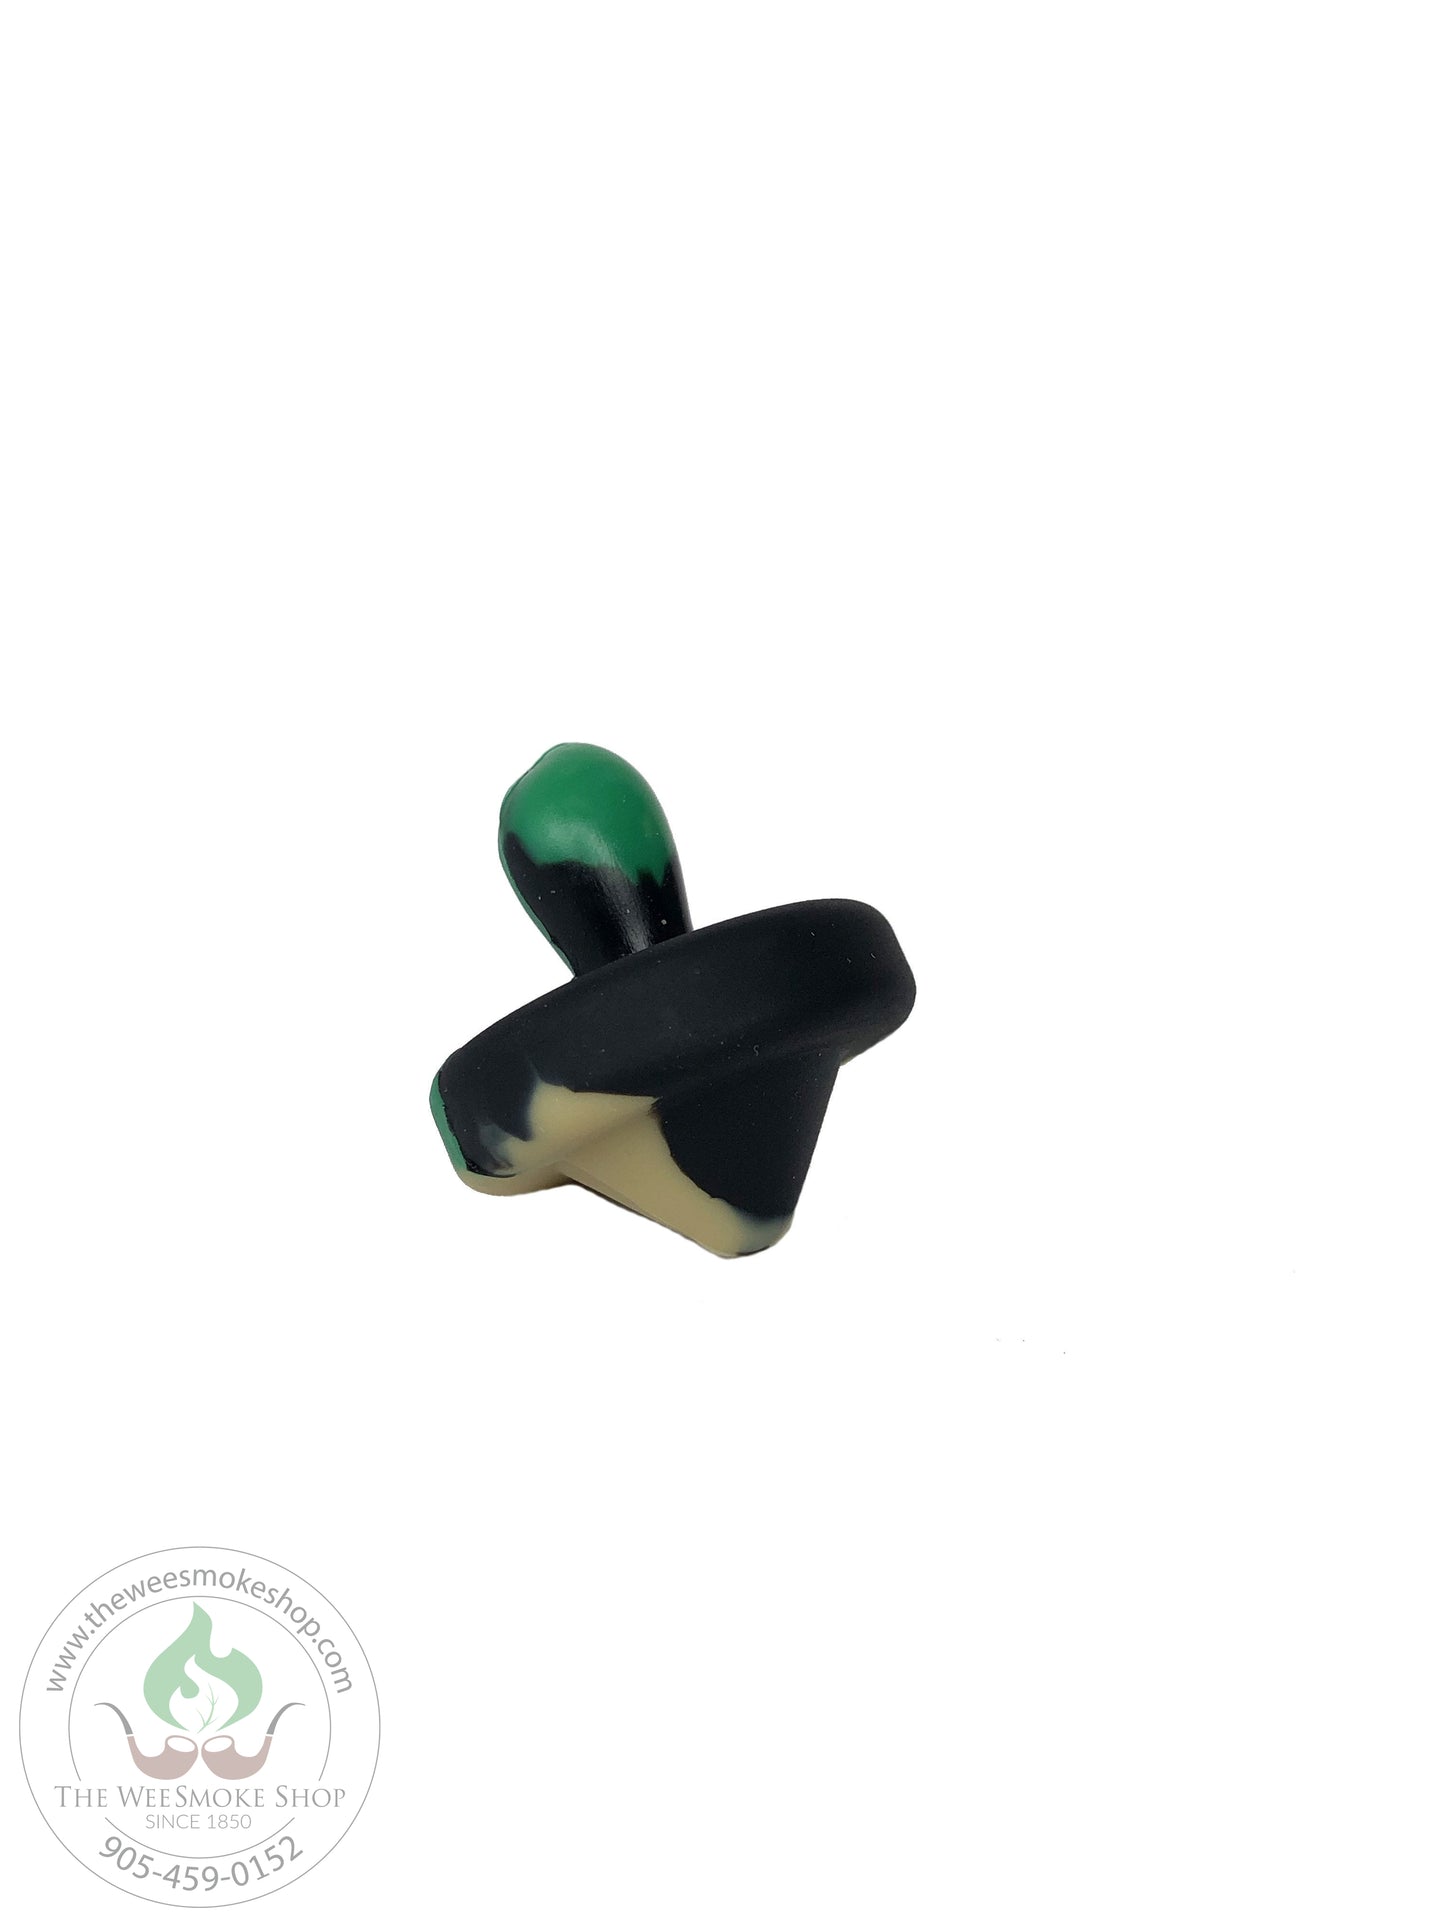 Black, Green and white Pointed Silicone Carb Cap - Wee Smoke Shop